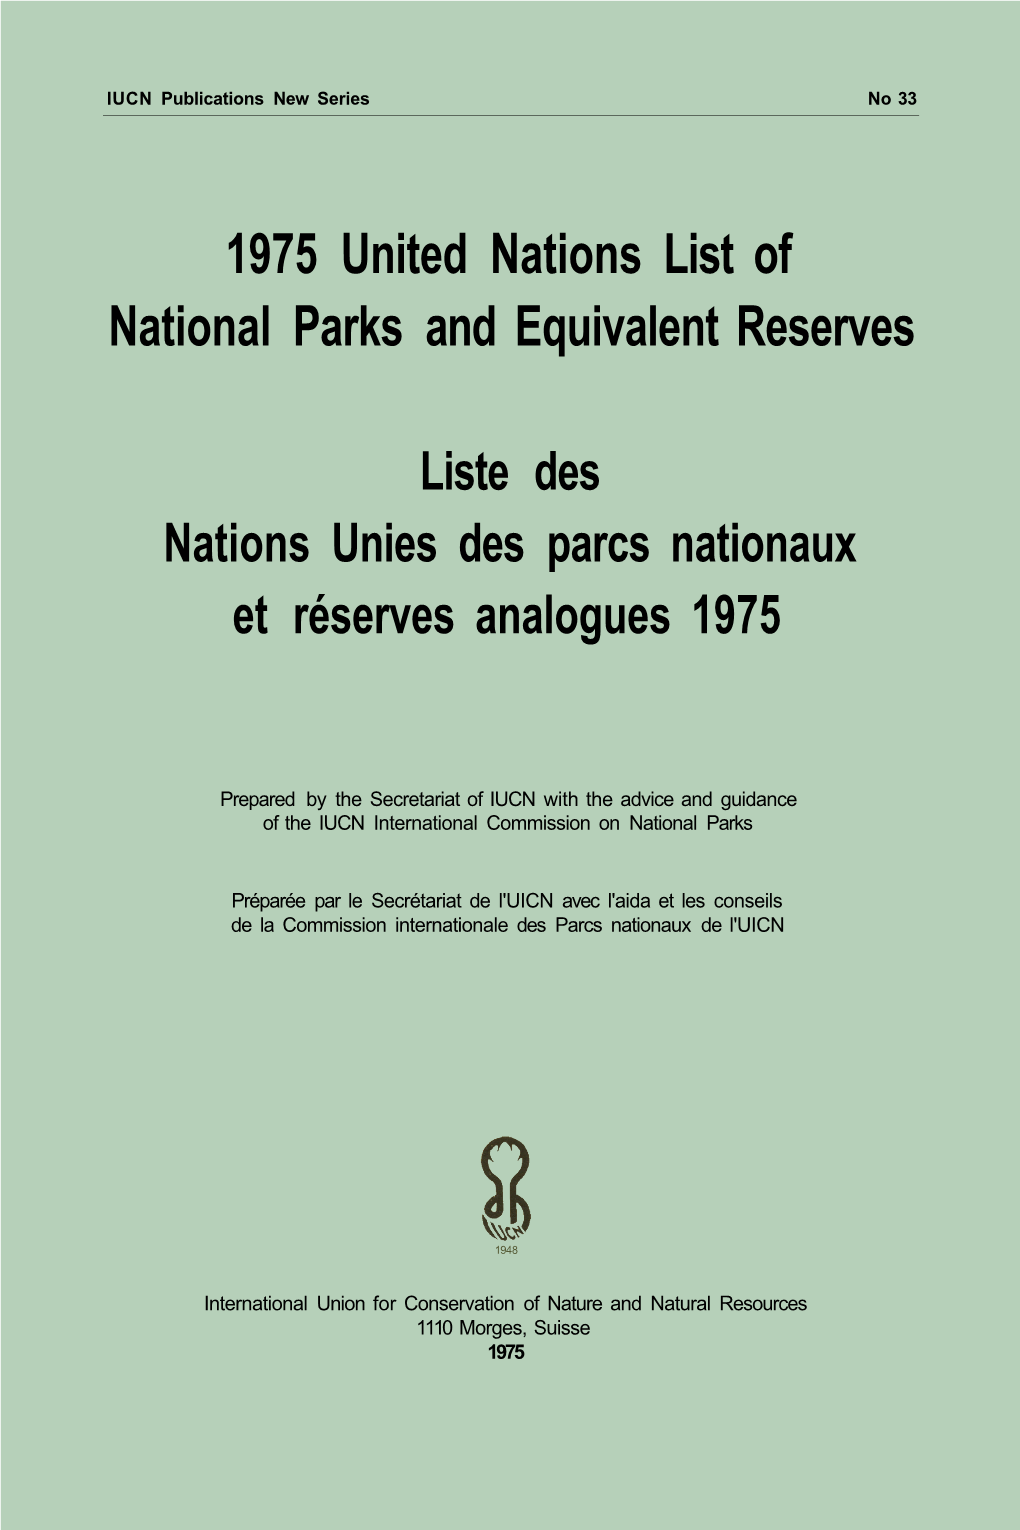 1975 United Nations List of National Parks and Equivalent Reserves